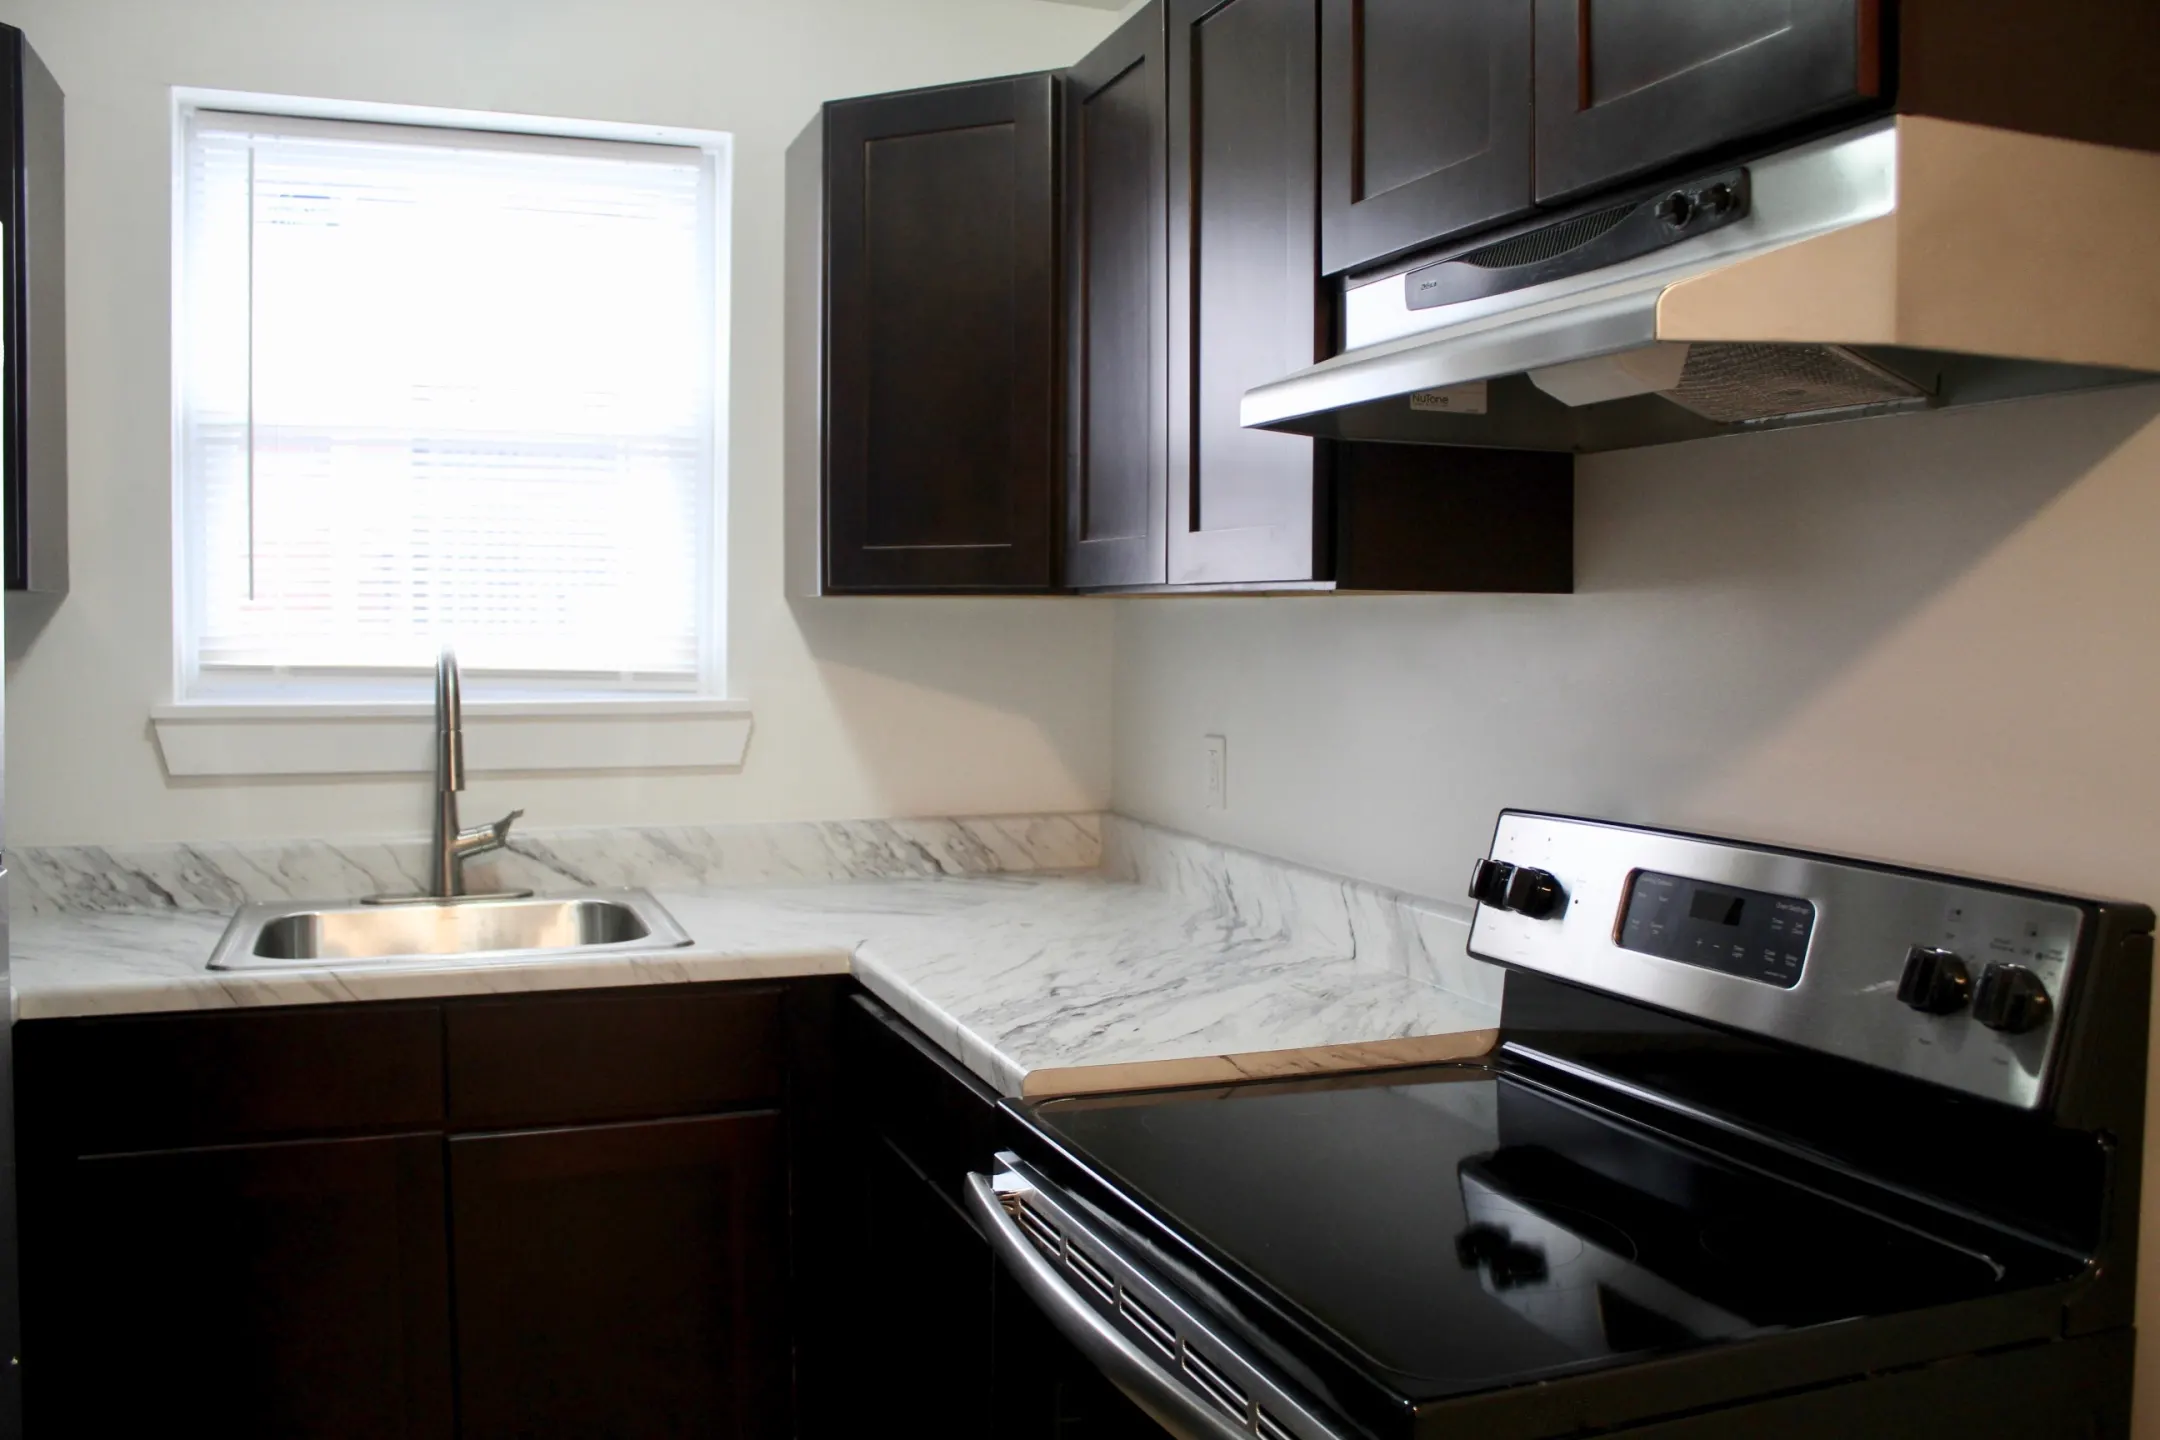 Kitchen - The Crossings at Elmwood - Woodlyn, PA